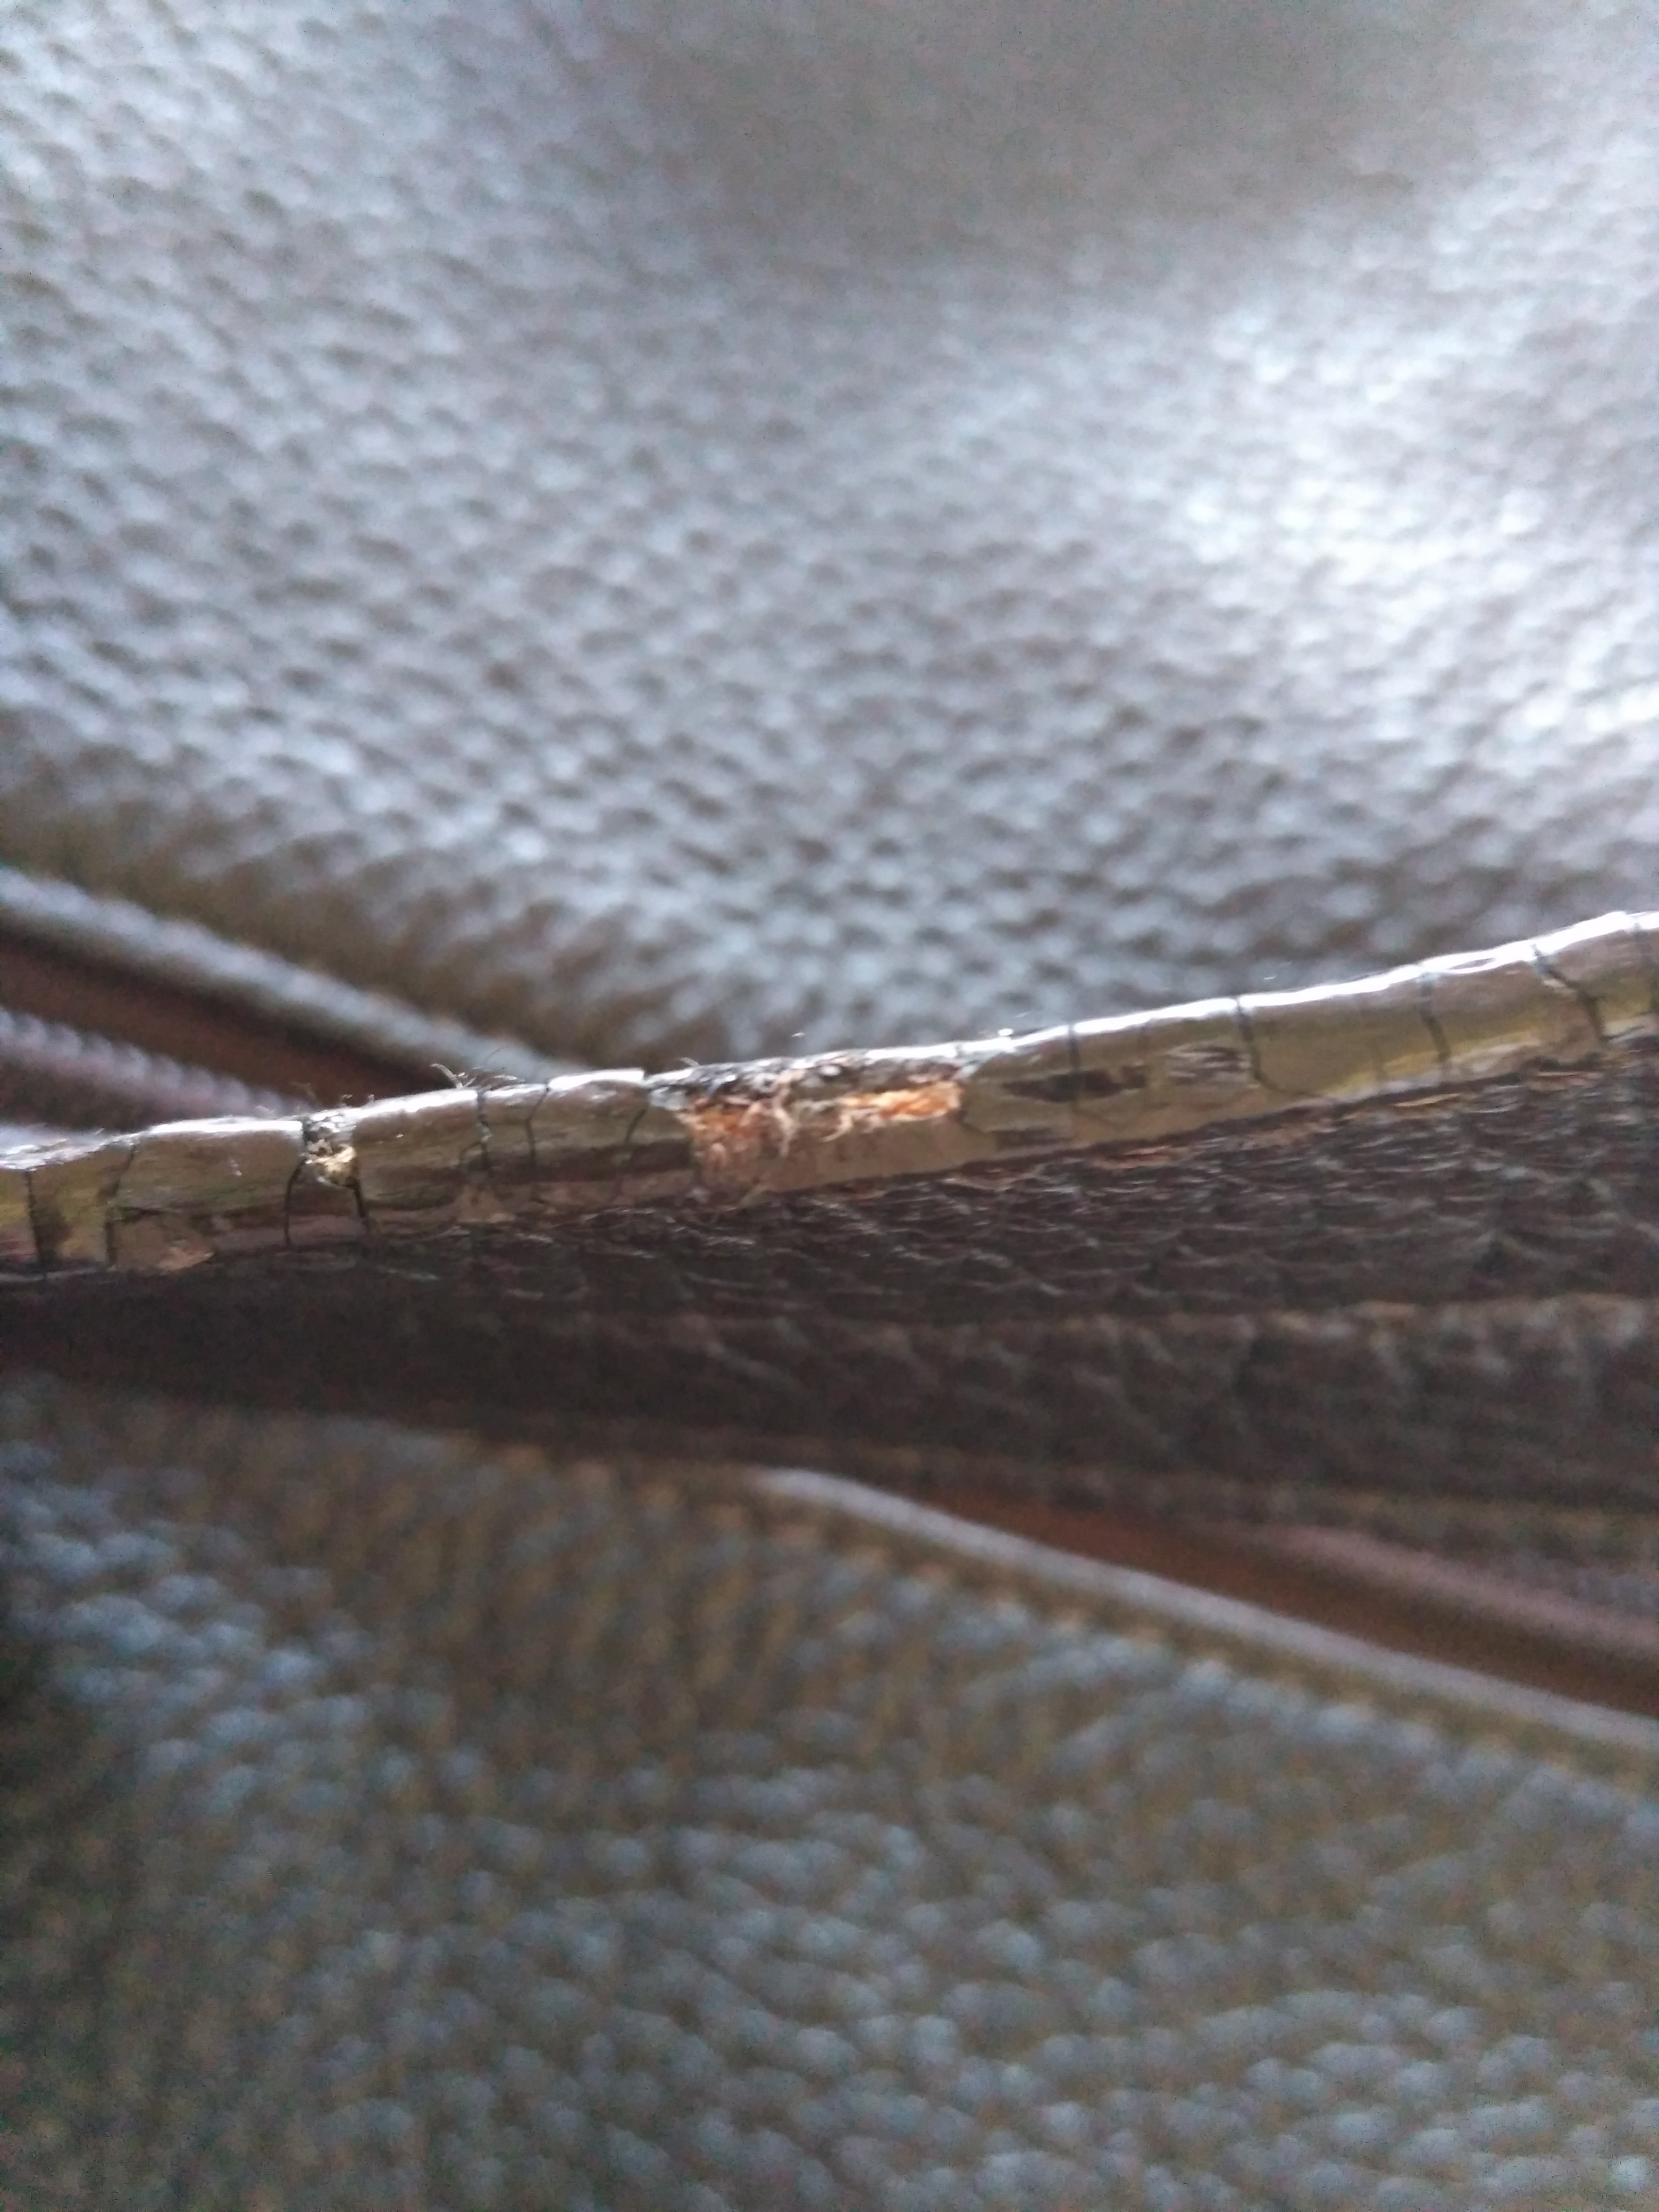 How can i fix my mom's bag - Repairing edges - How Do I Do That